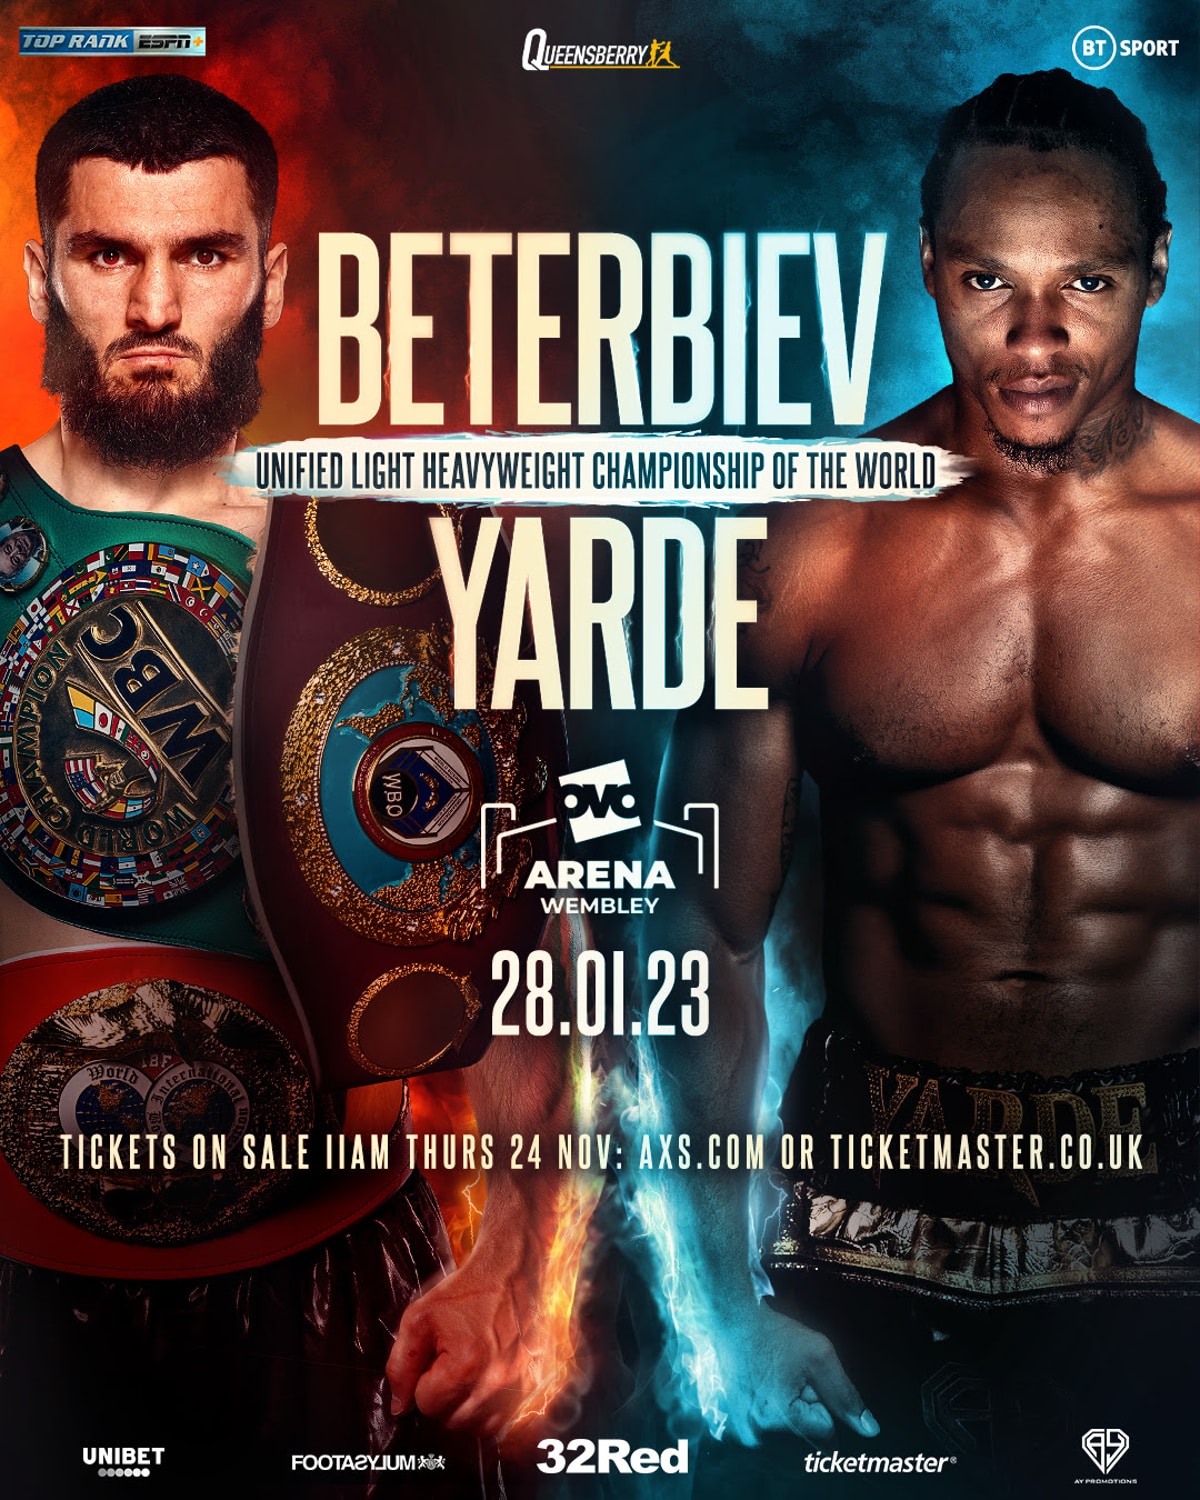 Image: Anthony Yarde has "great chance" of beating Artur Beterbiev says Frank Warren